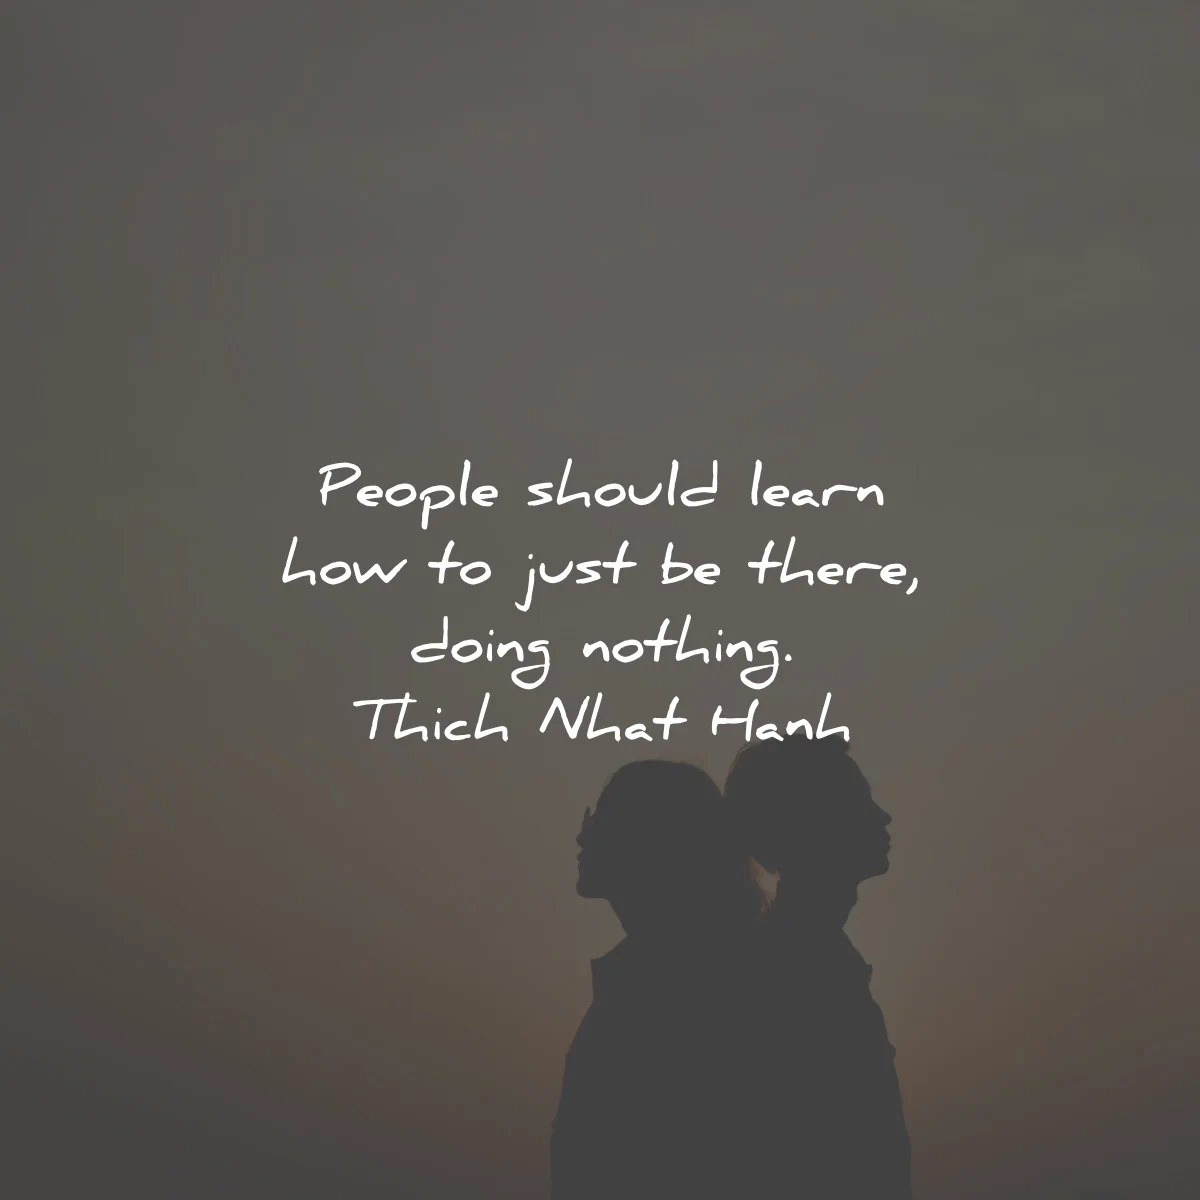 thich nhat hanh quotes people should learn just there doing nothing wisdom